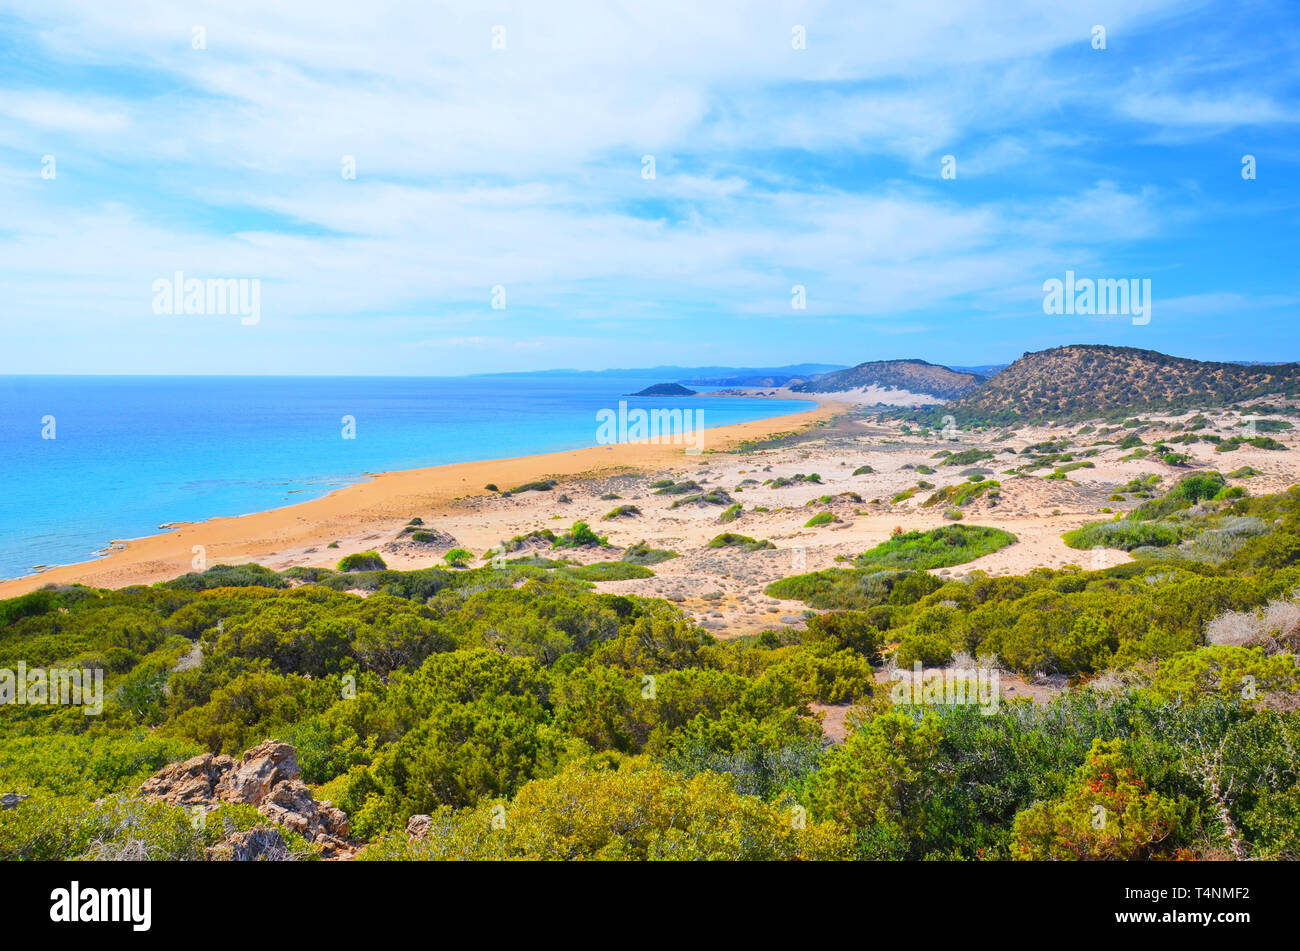 Amazing view of the beautiful sea landscape in Karpas Peninsula, Northern Cyprus. The Turkish part of Cyprus is an off the beaten track destination. Stock Photo